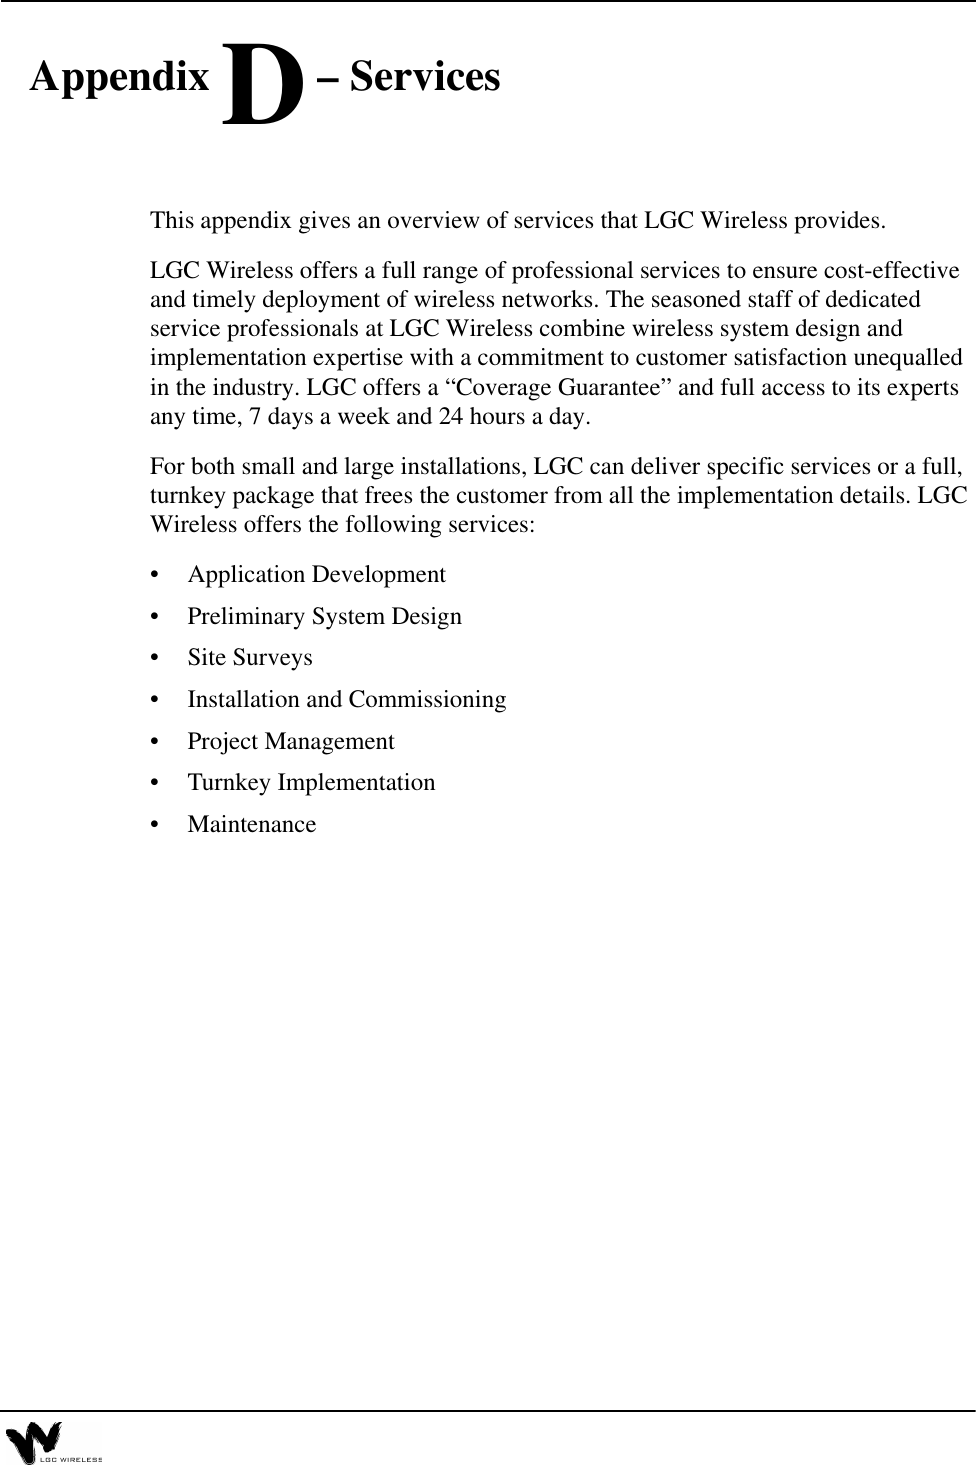  Appendix D – ServicesThis appendix gives an overview of services that LGC Wireless provides.LGC Wireless offers a full range of professional services to ensure cost-effective and timely deployment of wireless networks. The seasoned staff of dedicated service professionals at LGC Wireless combine wireless system design and implementation expertise with a commitment to customer satisfaction unequalled in the industry. LGC offers a “Coverage Guarantee” and full access to its experts any time, 7 days a week and 24 hours a day.For both small and large installations, LGC can deliver specific services or a full, turnkey package that frees the customer from all the implementation details. LGC Wireless offers the following services:•Application Development•Preliminary System Design•Site Surveys•Installation and Commissioning•Project Management•Turnkey Implementation•Maintenance